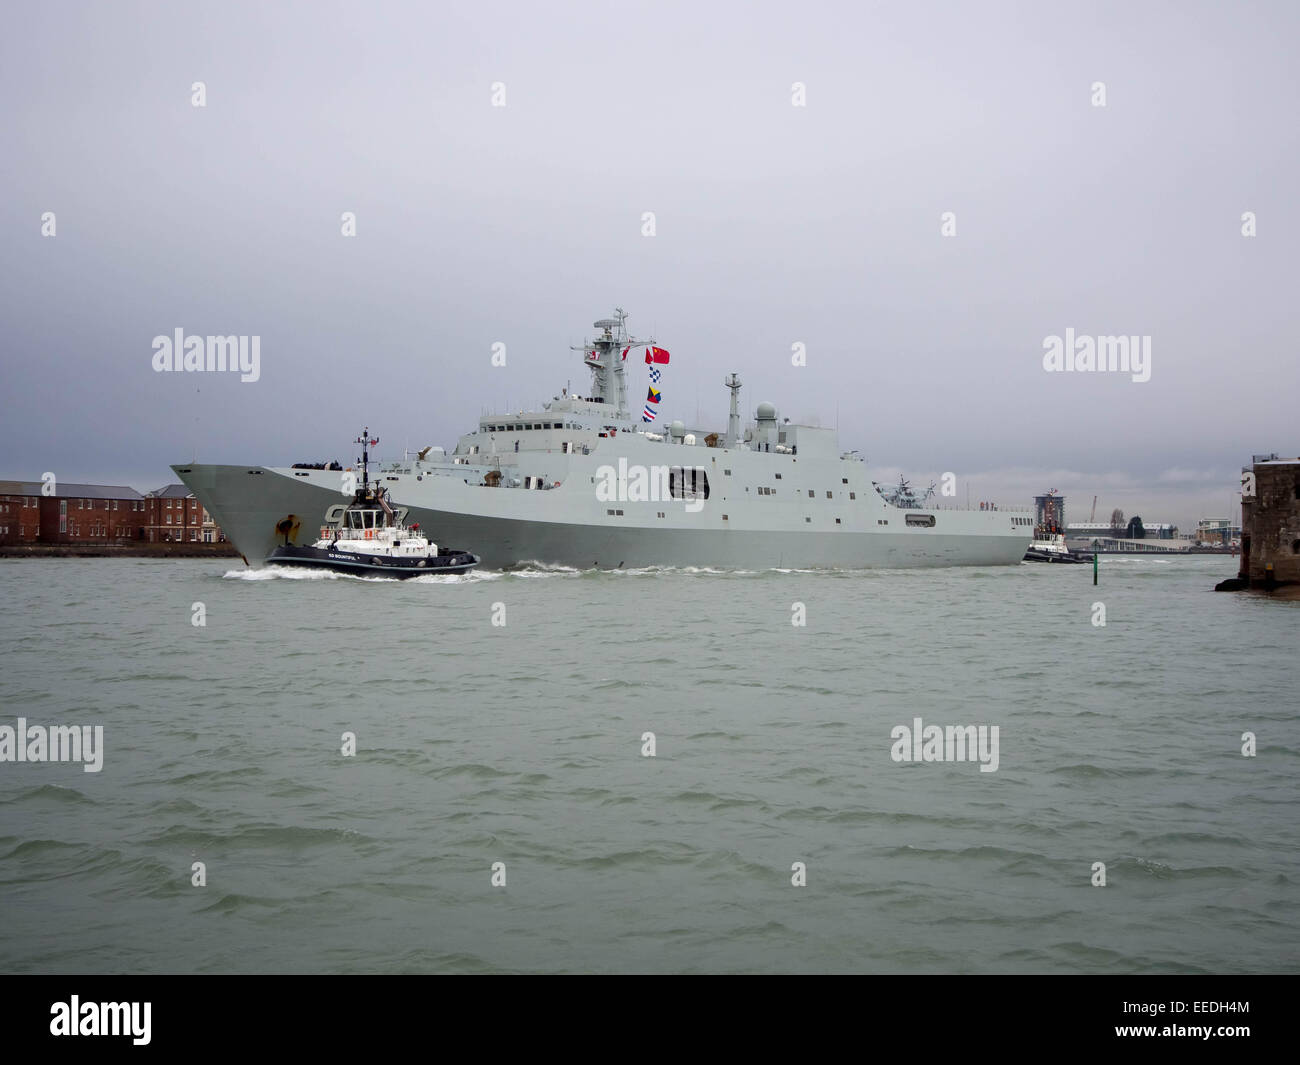 Portsmouth, England, 16th January 2015. assault ship Chang Bai Shan of the People's Liberation Army Navy leaves Portsmouth Harbour after a 5 day visit aimed at enhancing military understanding between the UK and China. The assault ship Chang Bai Shan was accompanied by the frigate Yun Cheng  and the replenishment ship Chaohu. Credit:  simon evans/Alamy Live News Stock Photo